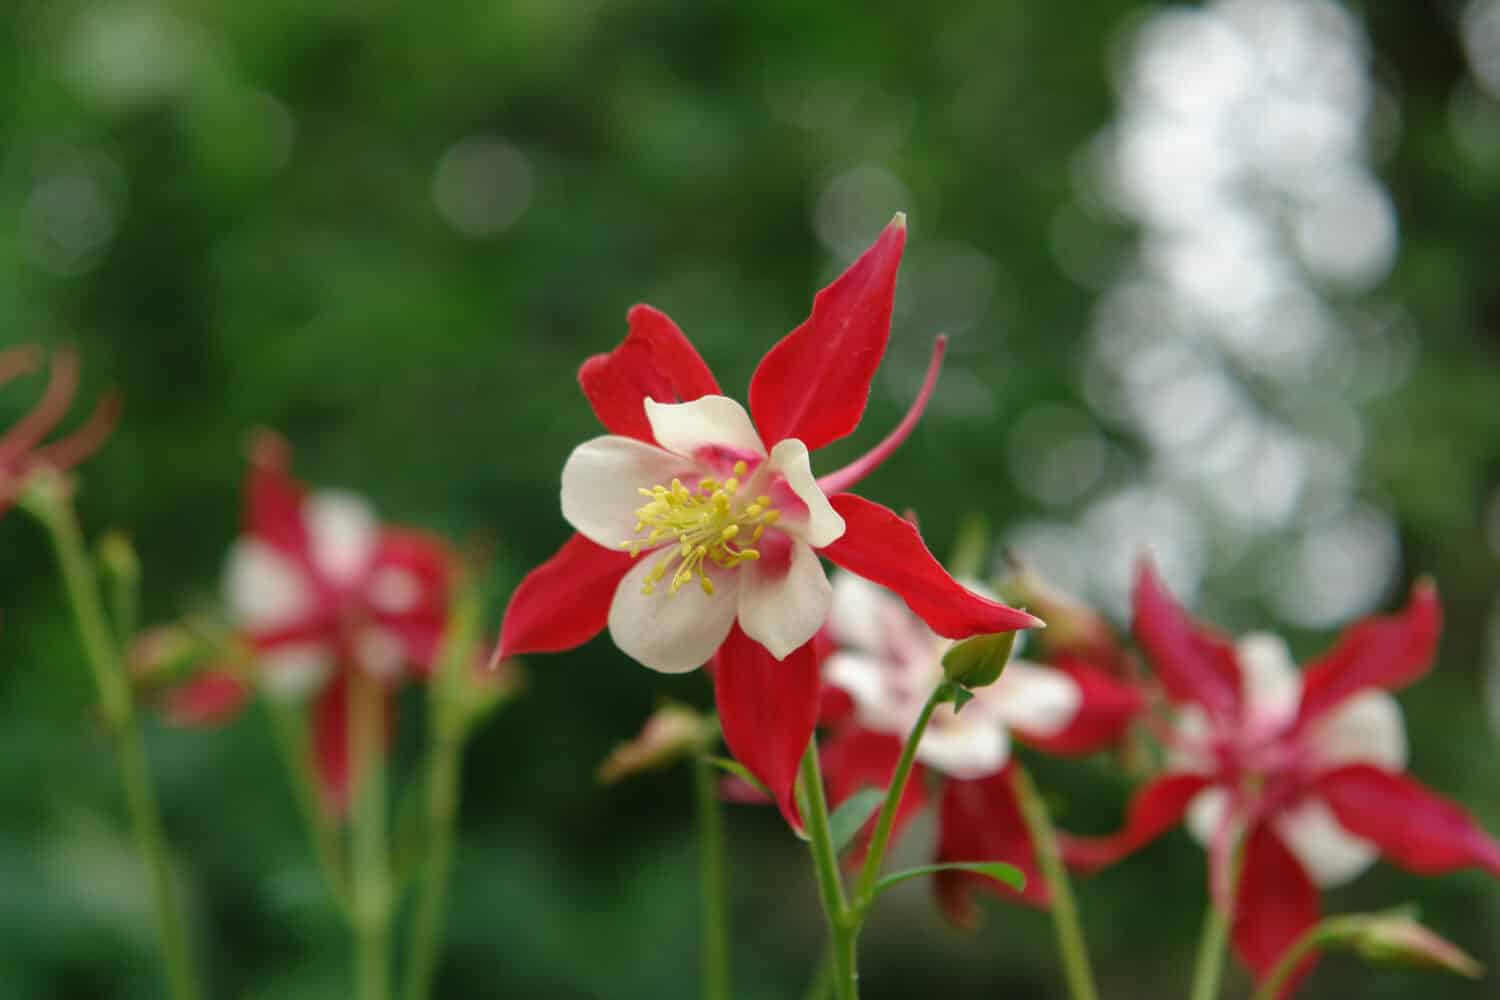 A close up of red and white bicolor flower of Aquilegia Songbird 'Cardinal' (granny's bonnet, columbine), natural blurred background, copy space for text